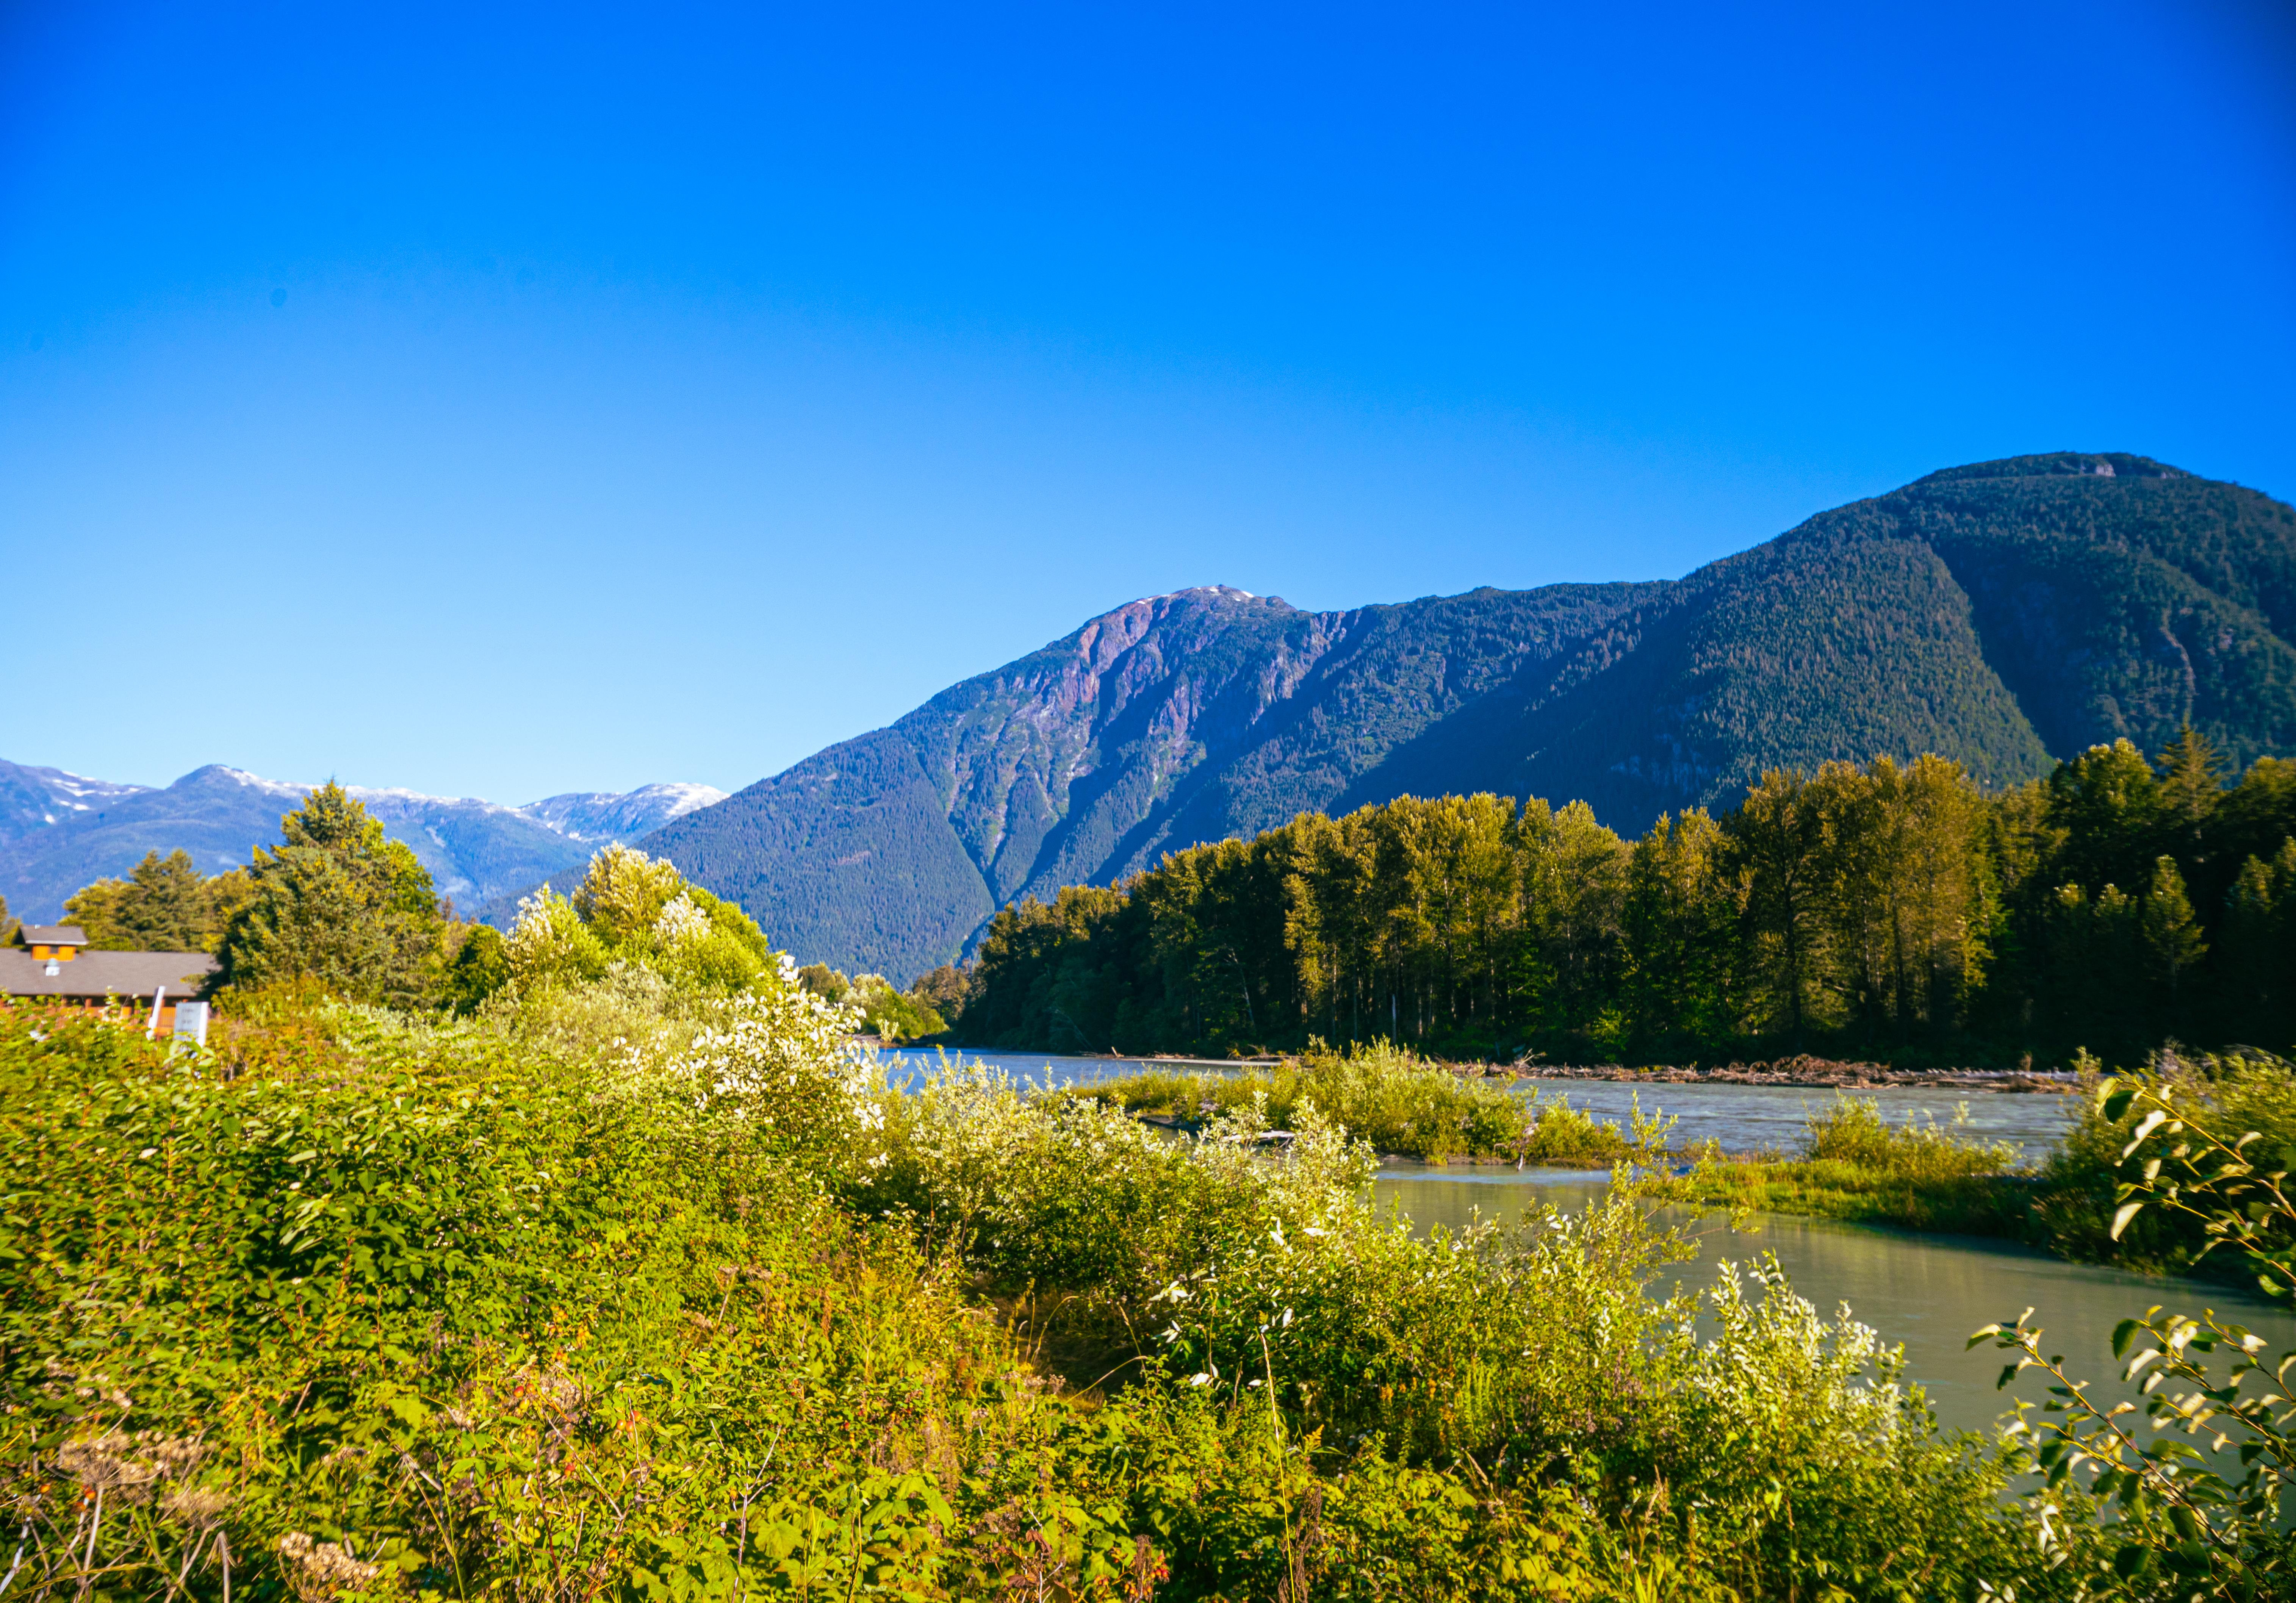 Landscape of Bella Coola with mountains in background.